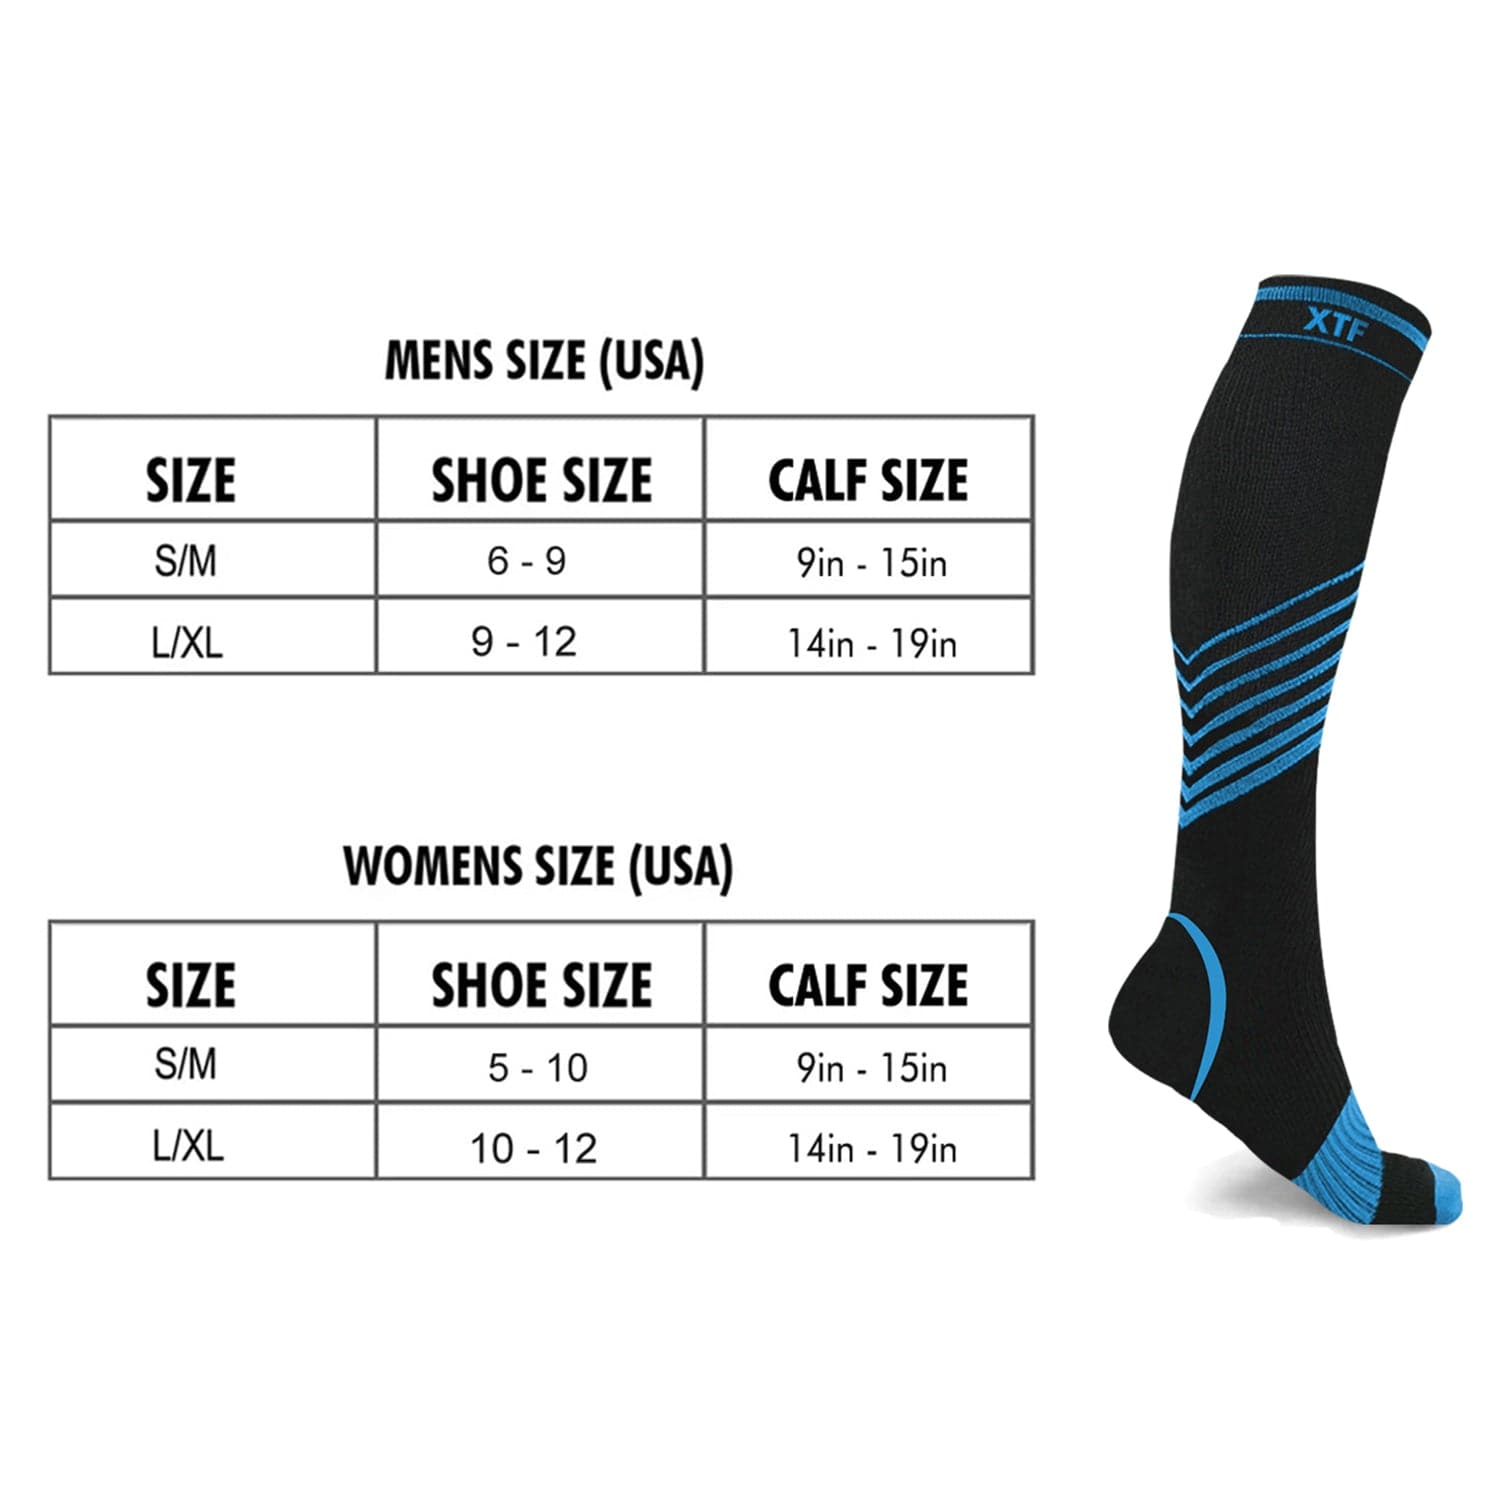 Men's Pain Relief & Recovery Socks (6-Pairs) – Extreme Fit